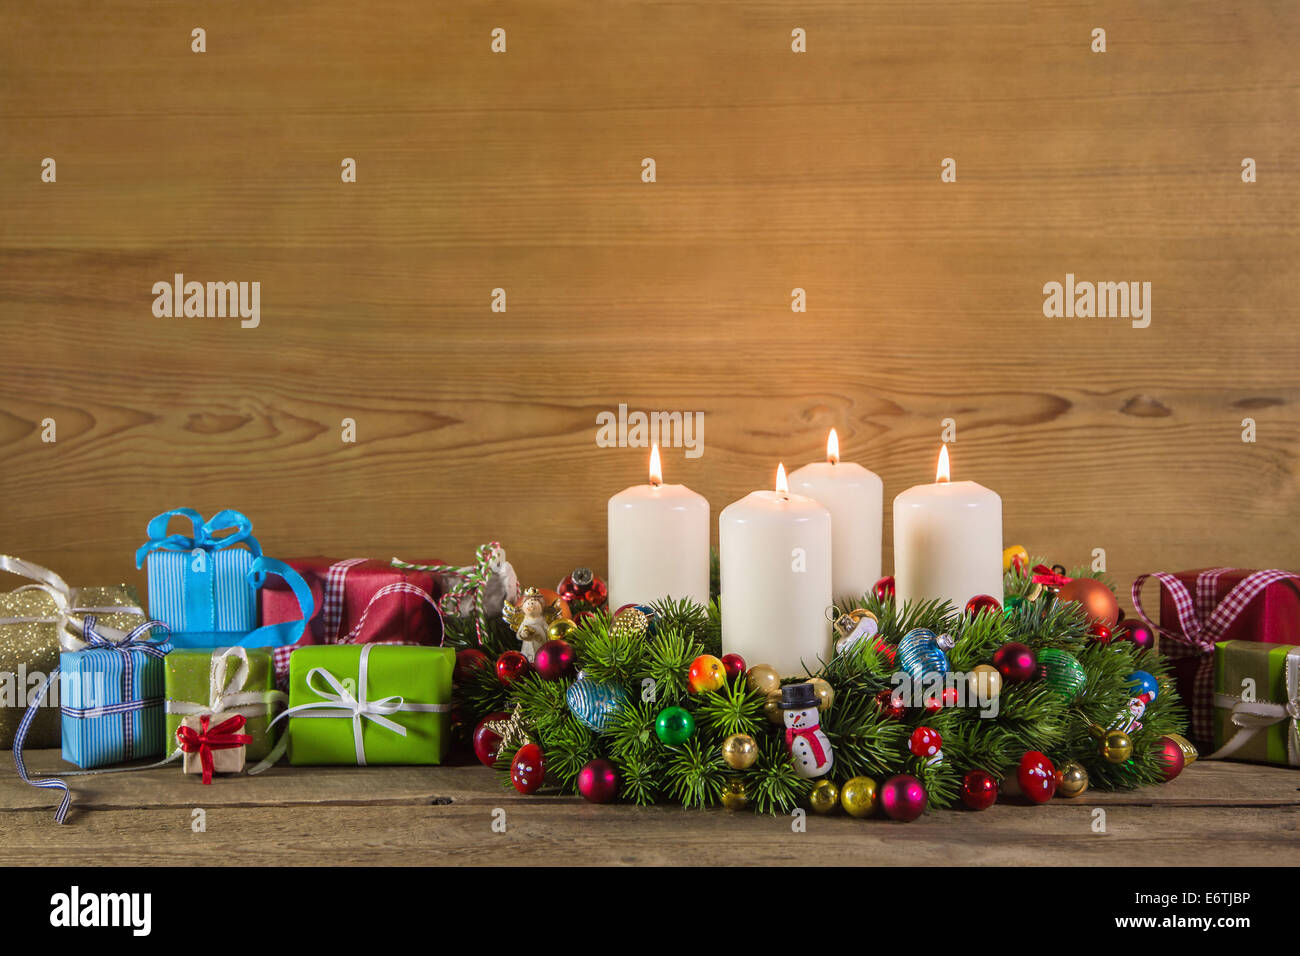 Christmas presents and advent wreath on wooden colorful background for decoration. Stock Photo